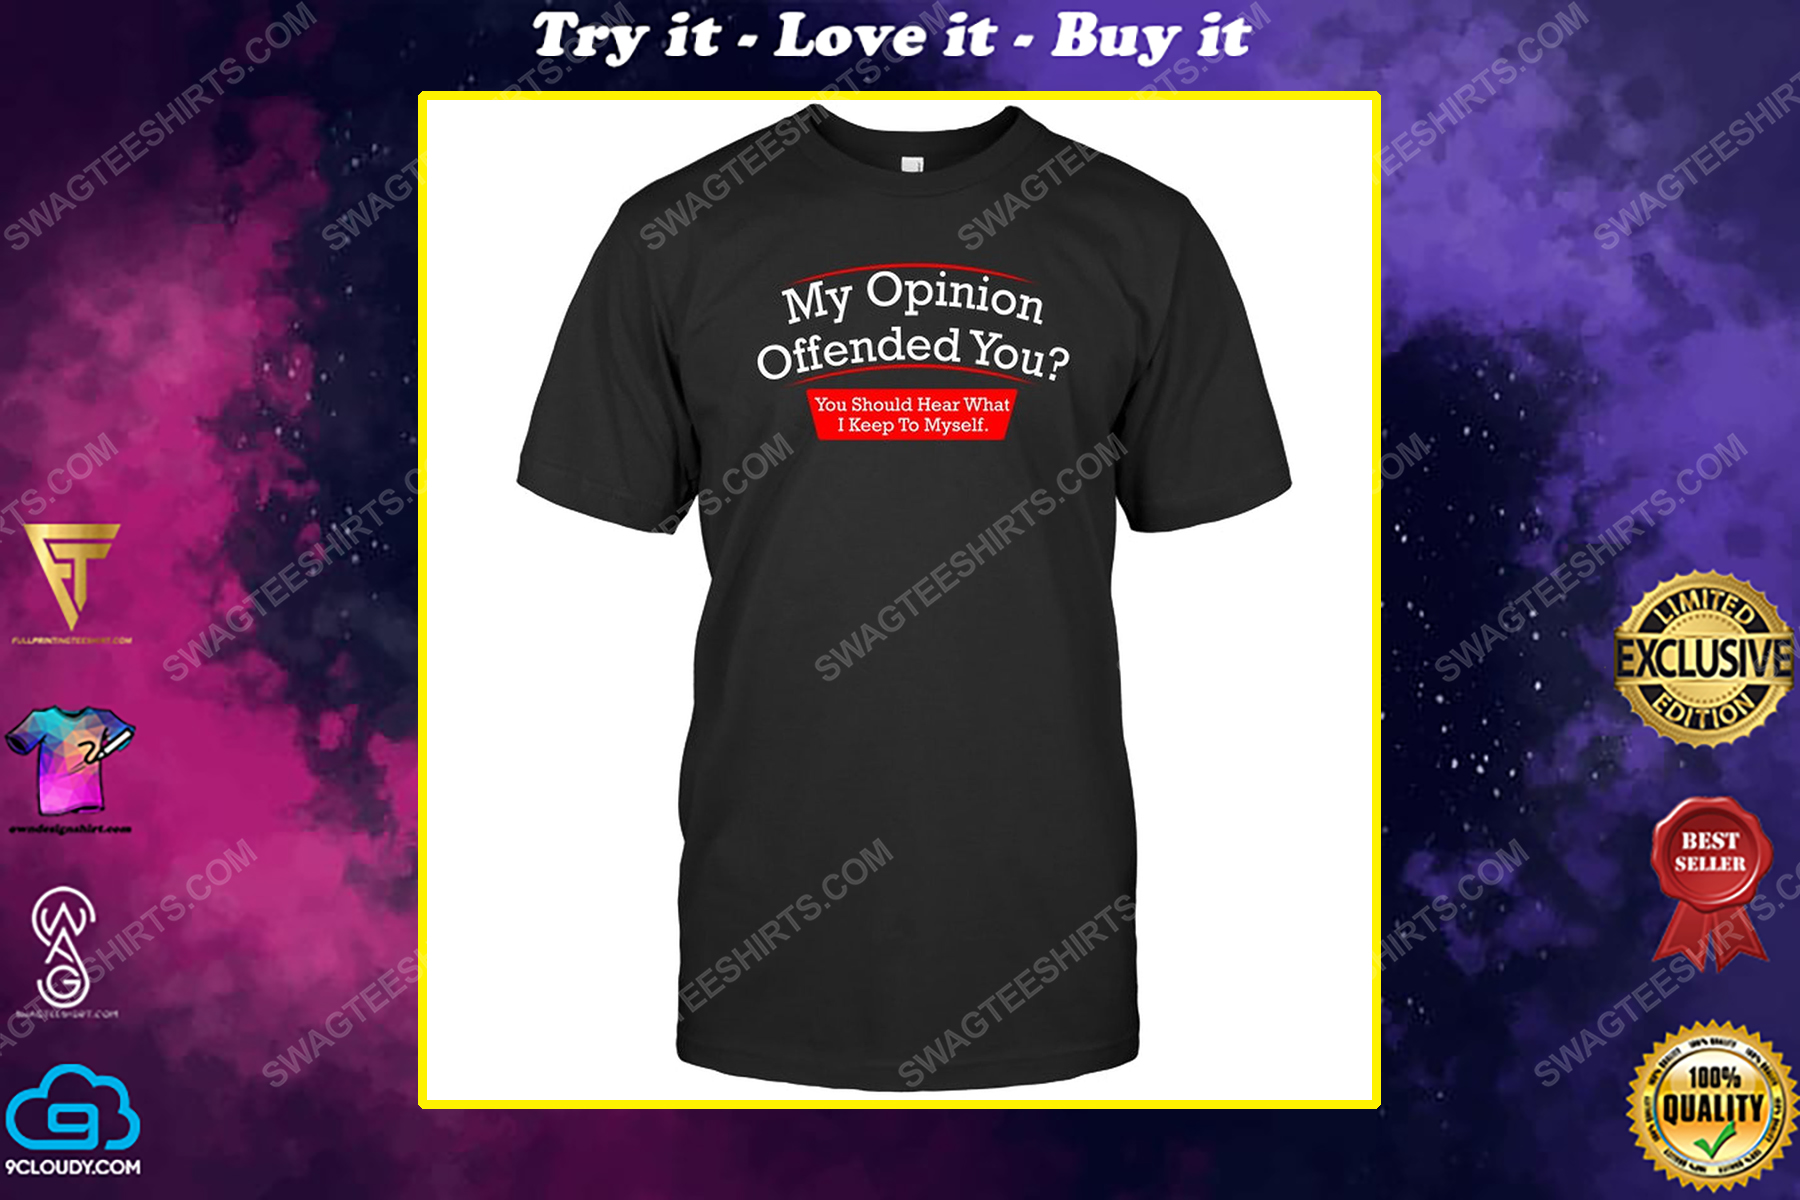 My opinion offended you you should hear what i keep to myself political shirt